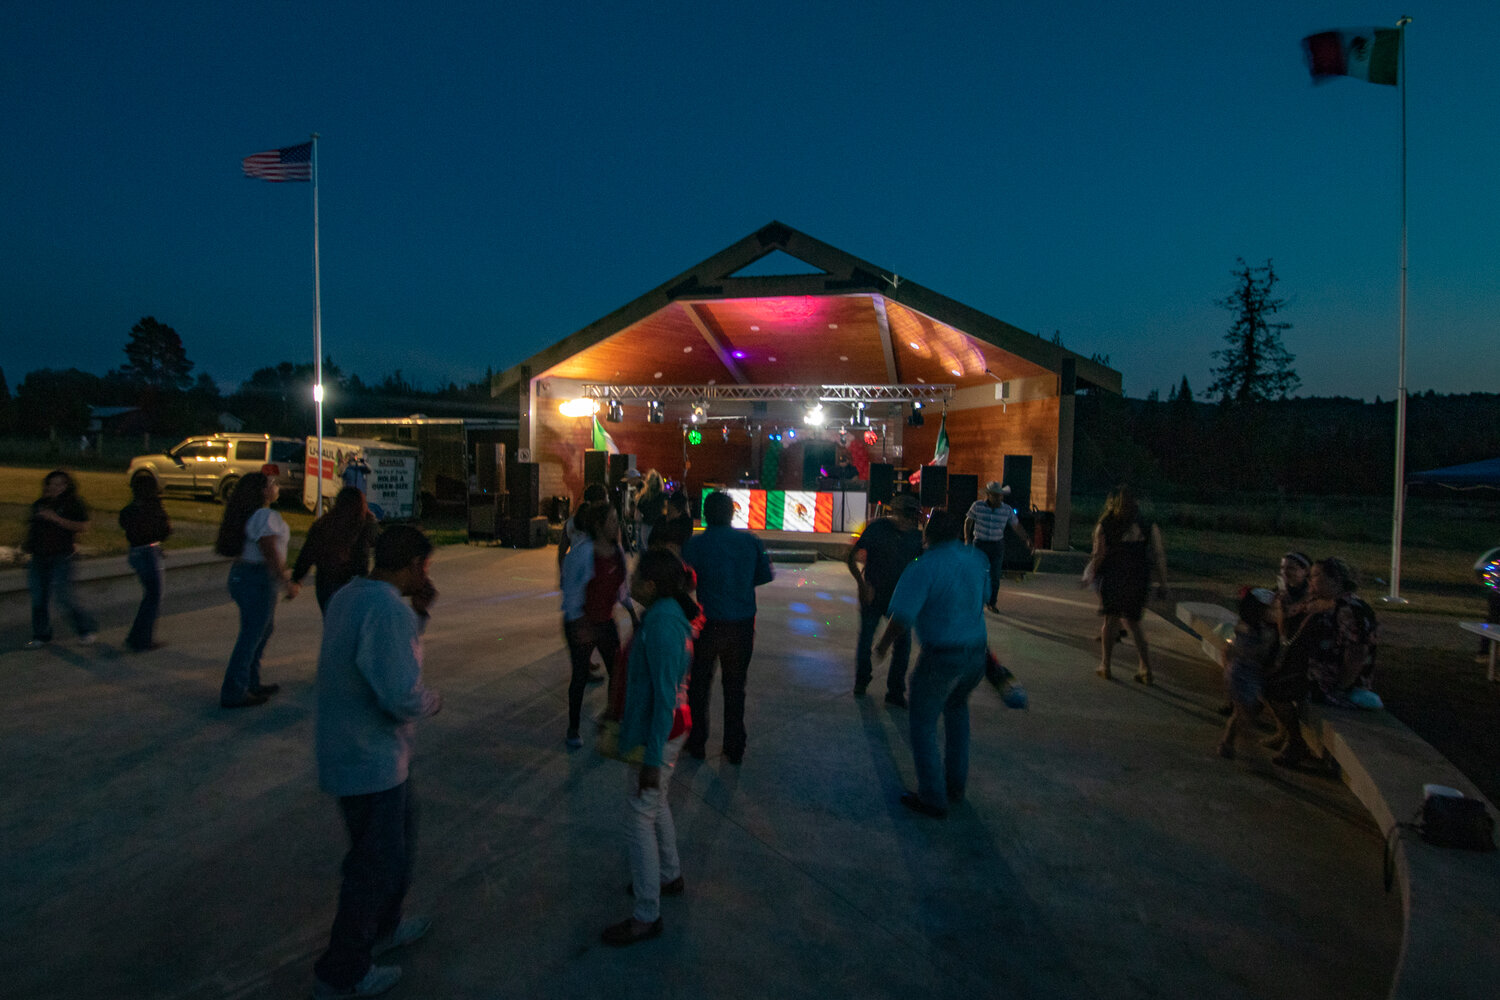 Attendees dance their way into the night to the sounds of DJ Escandalo Zona Orienta at the Mexican Independence Day celebration at Klickitat Prairie Park in Mossyrock on Saturday, Sept. 16.